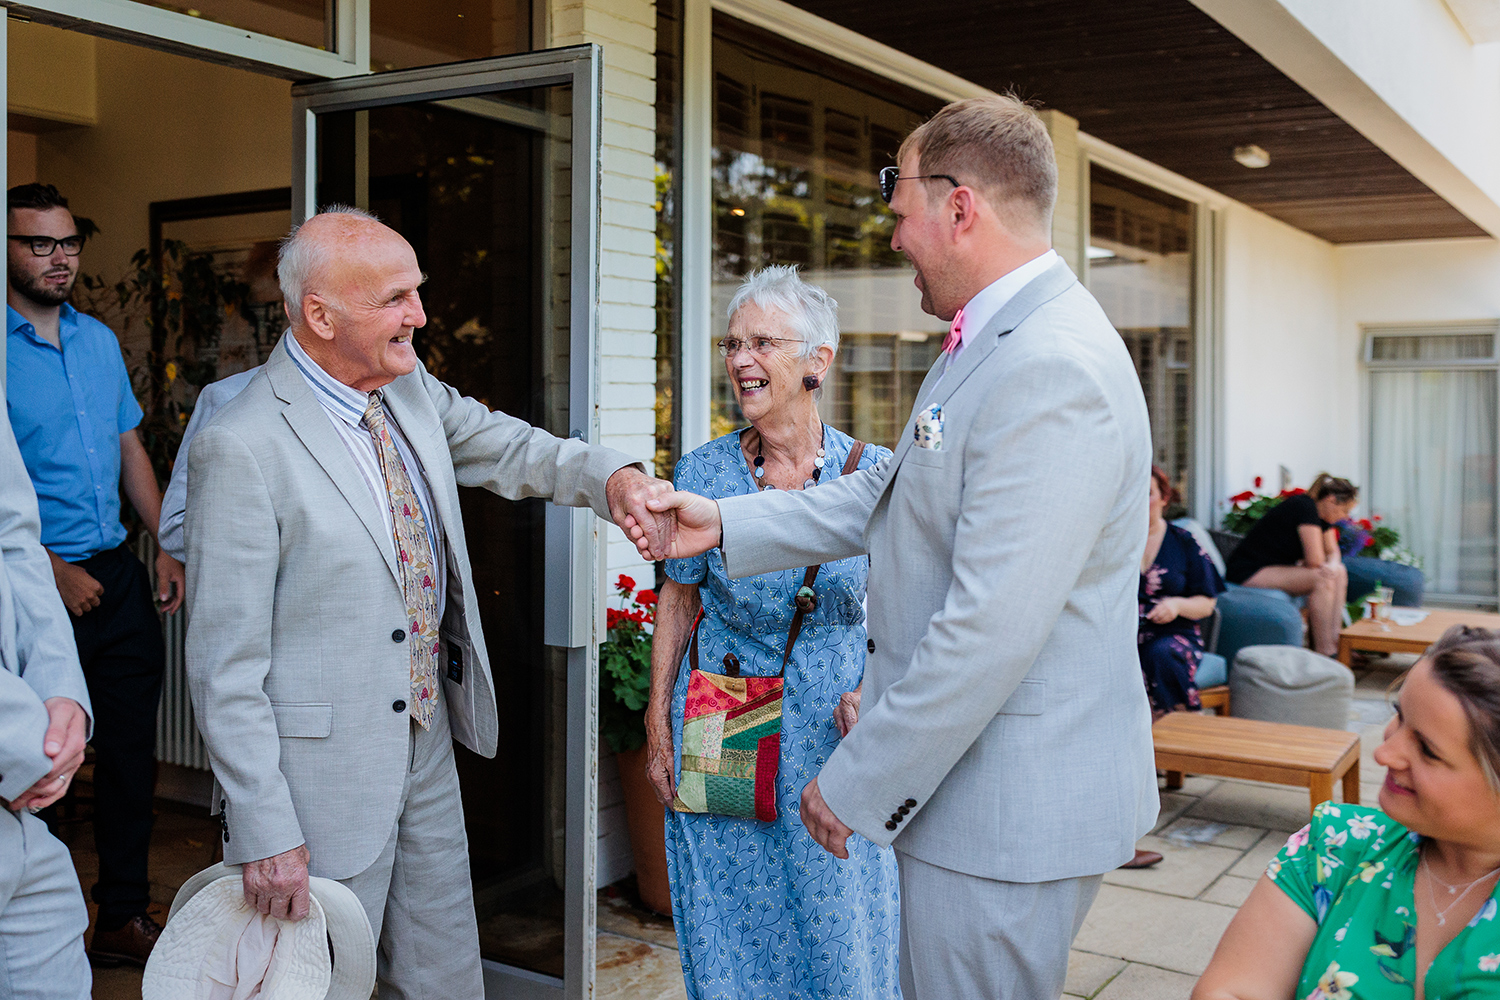 The groom greets his guests at The Atlantic Hotel, Jersey ahead of his marriage to his sweetheart